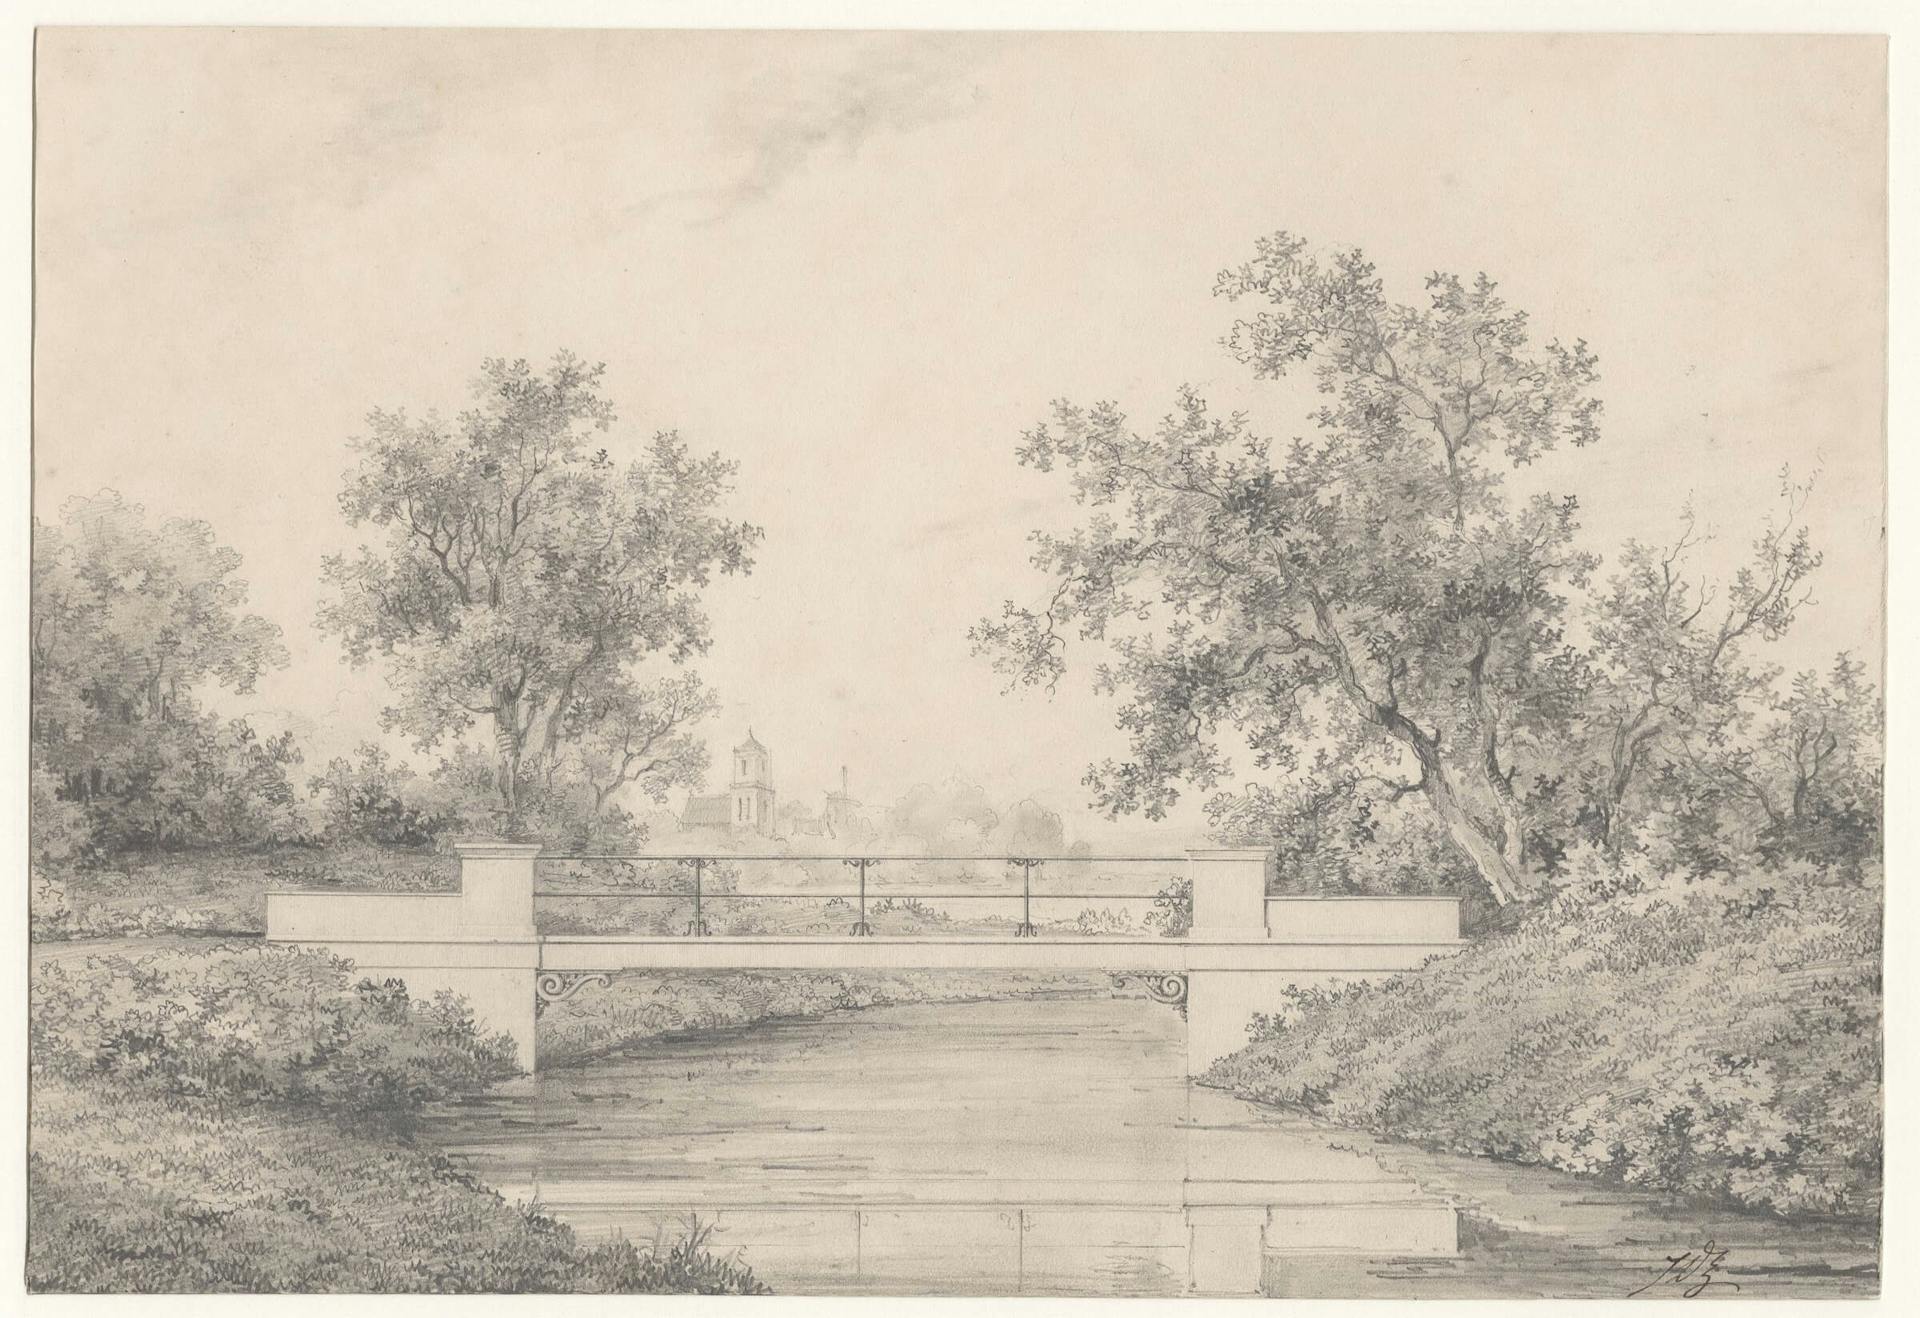 J.D. Zocher Jr. designed the bridges for Het Park. Though these designs have not survived, the bridge in this drawing is very similar to a bridge he designed for Het Park, ca. 1862. Collection Het Nieuwe Instituut, Zocher Collection, ZOCH 44 